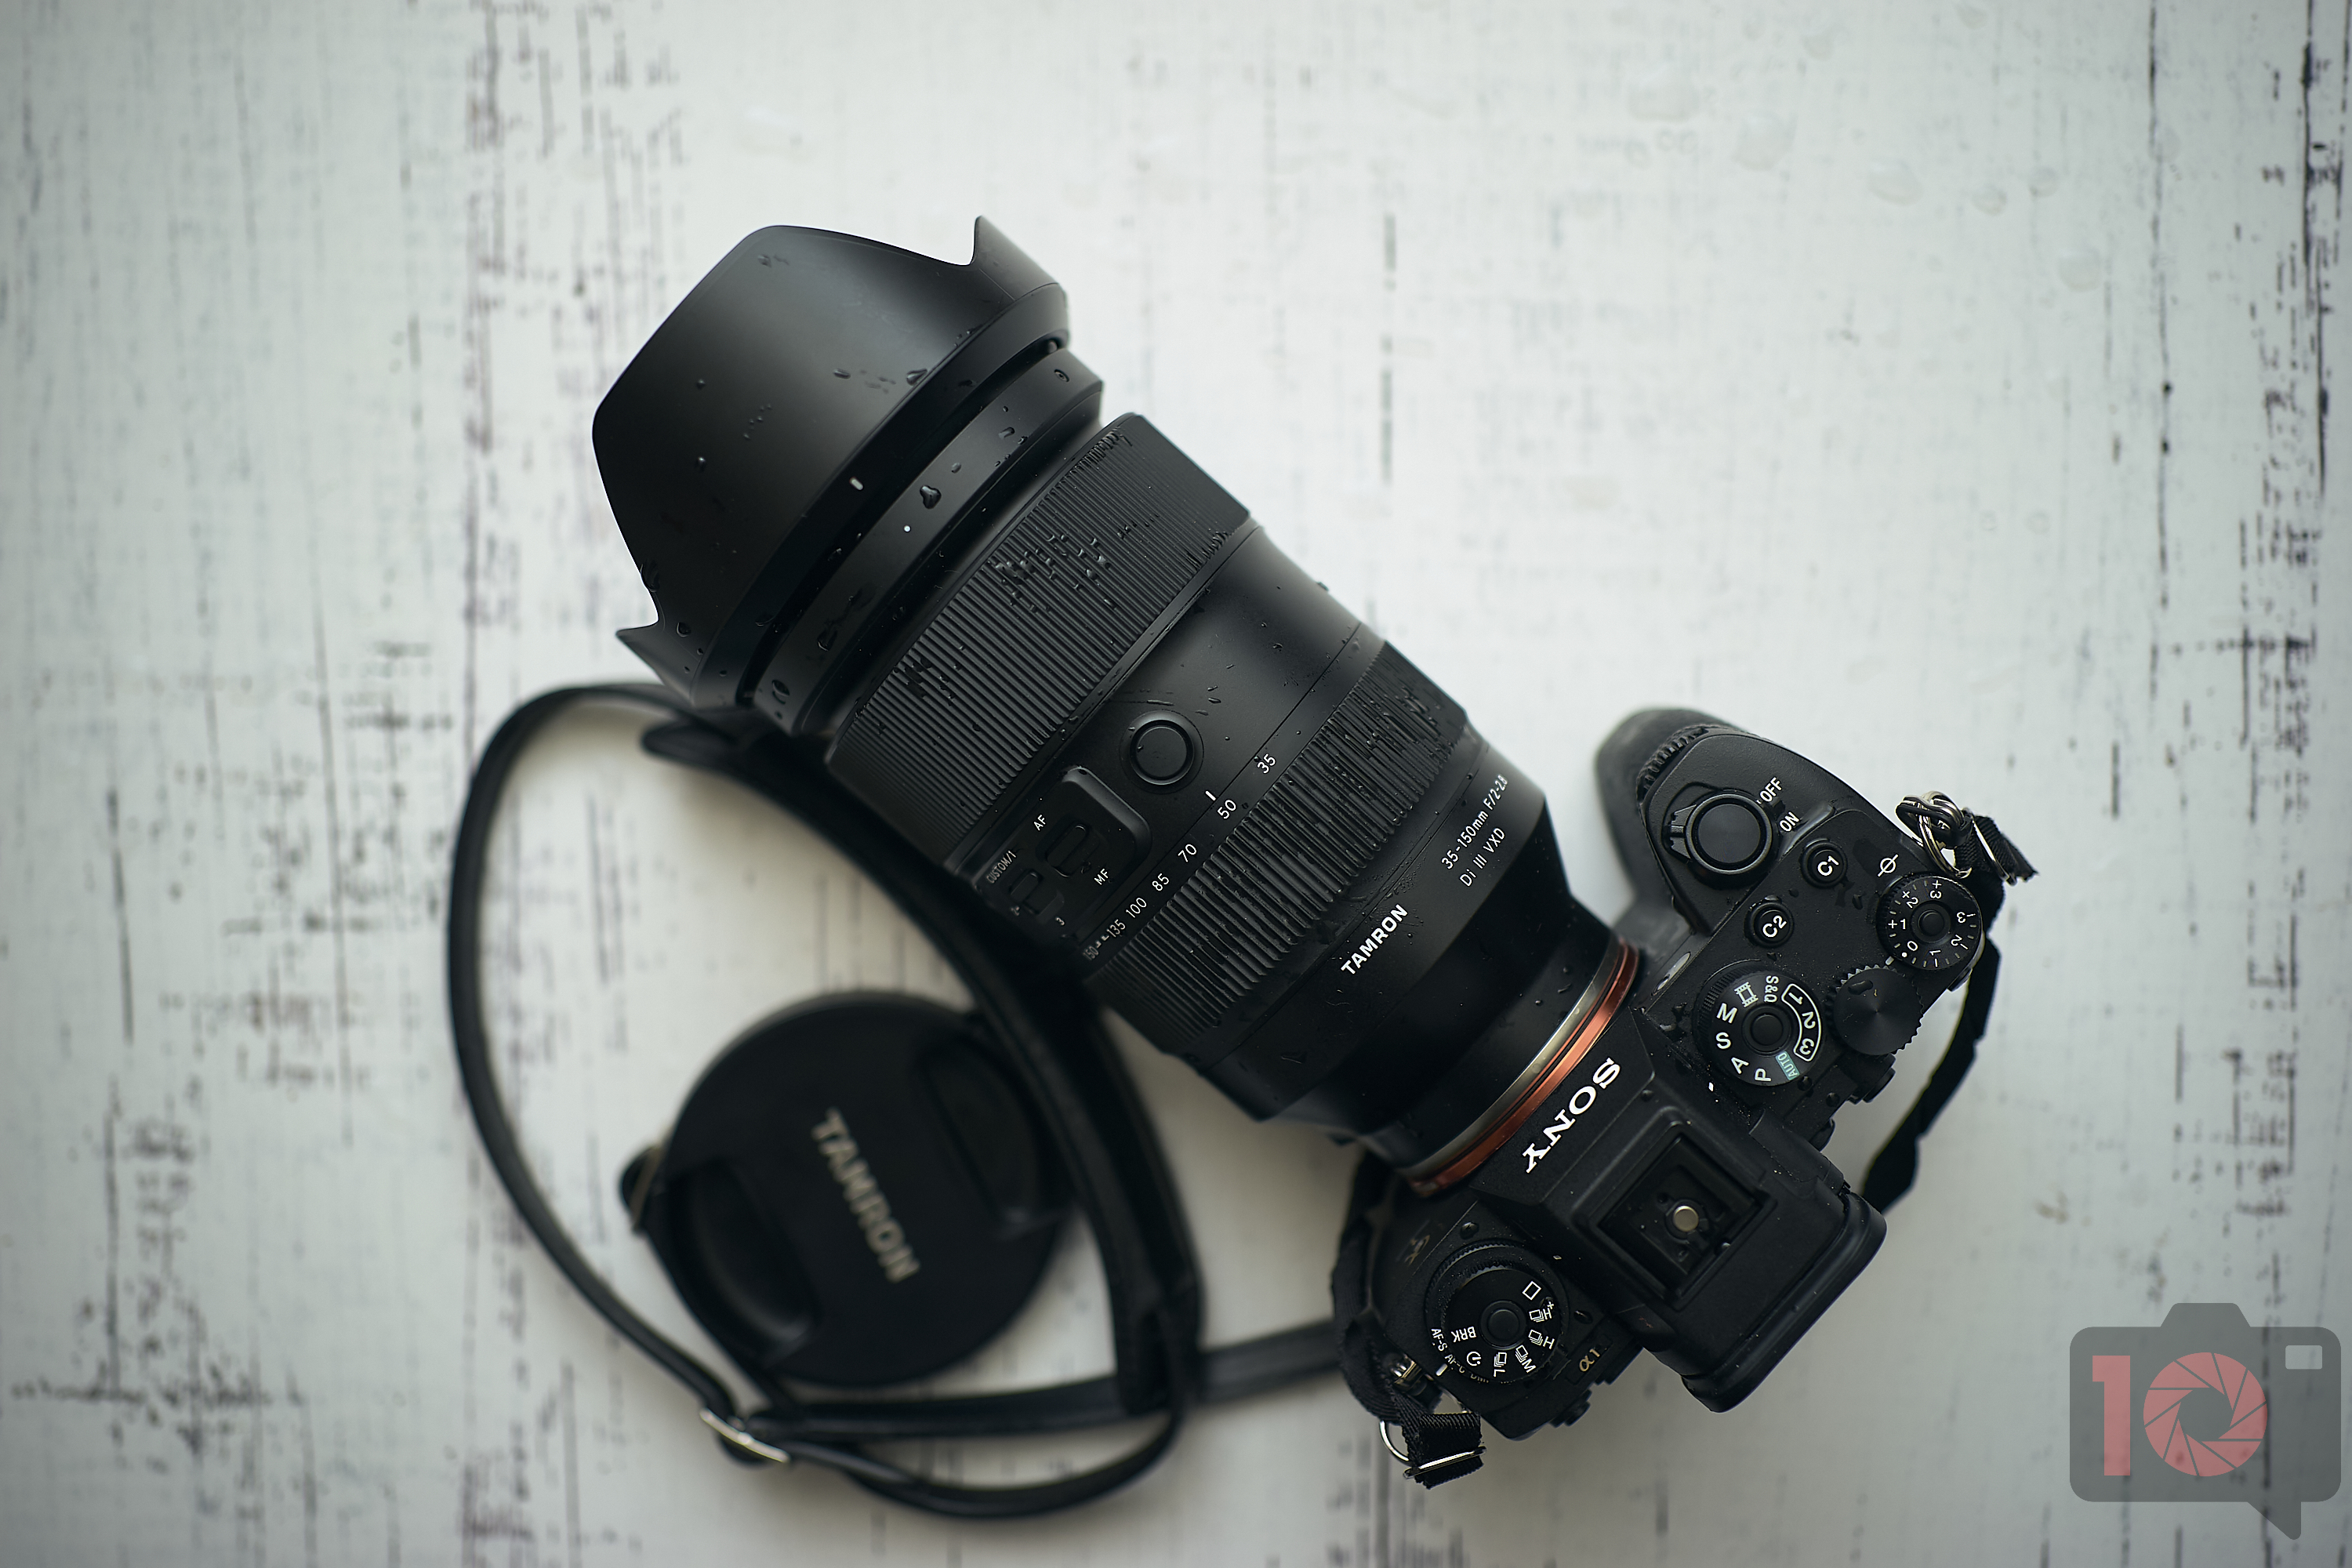 Chris Gampat The Phoblographer Tamron 35-150mm f2-2.8 review product images 2.21-250s400 10